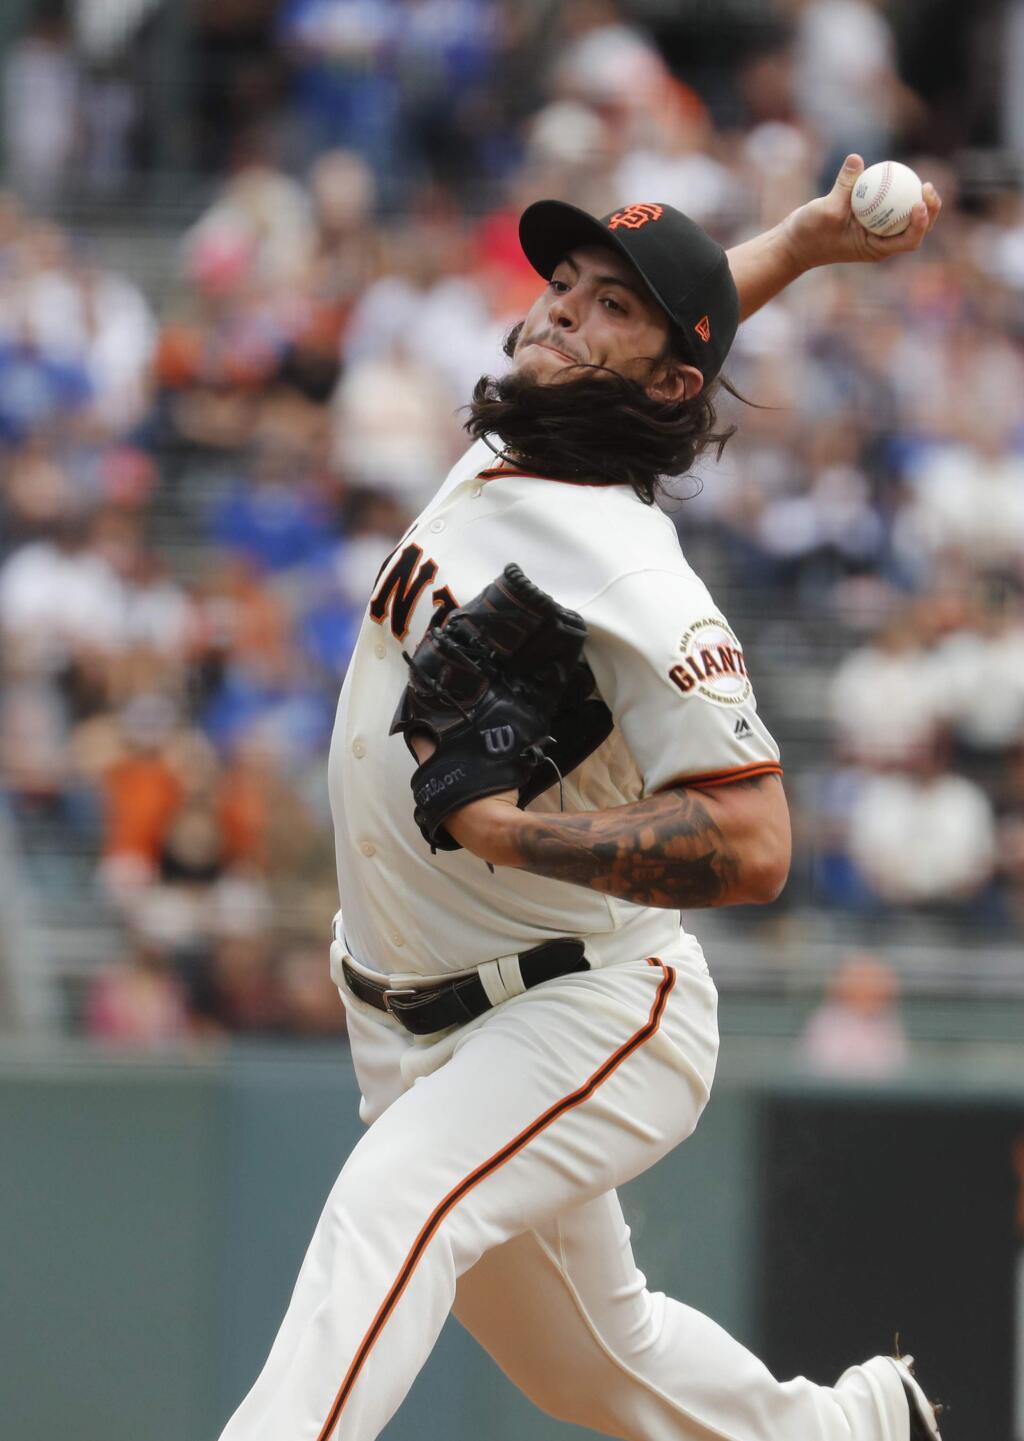 San Francisco Giants starting pitcher Dereck Rodriguez pitches against the Los Angeles Dodgers during the first inning in San Francisco, Saturday, Sept. 29, 2018. (AP Photo/Jim Gensheimer)